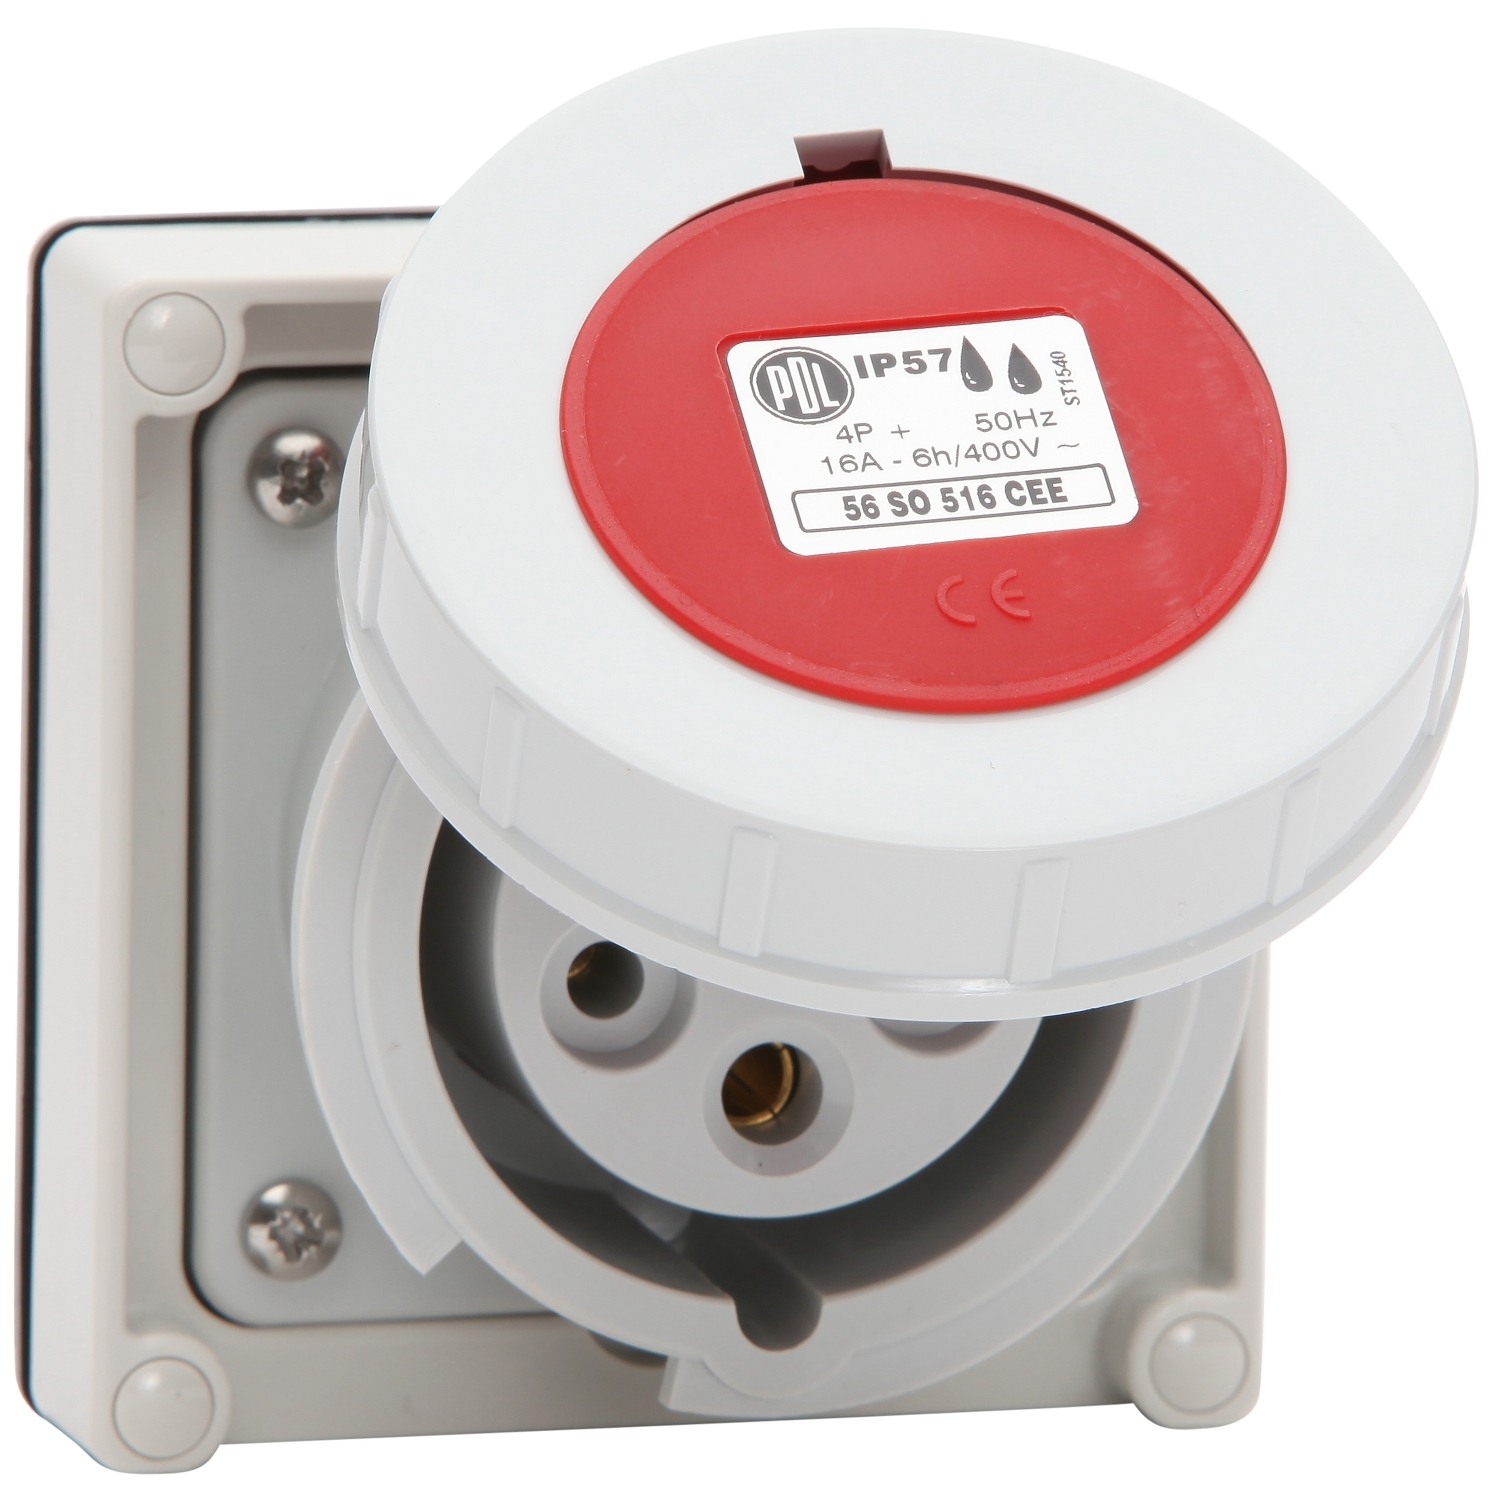 PDL 56 Series - Socket CEE 16A 400V 3-Phase 5-Round Pin IP57 - Grey Red